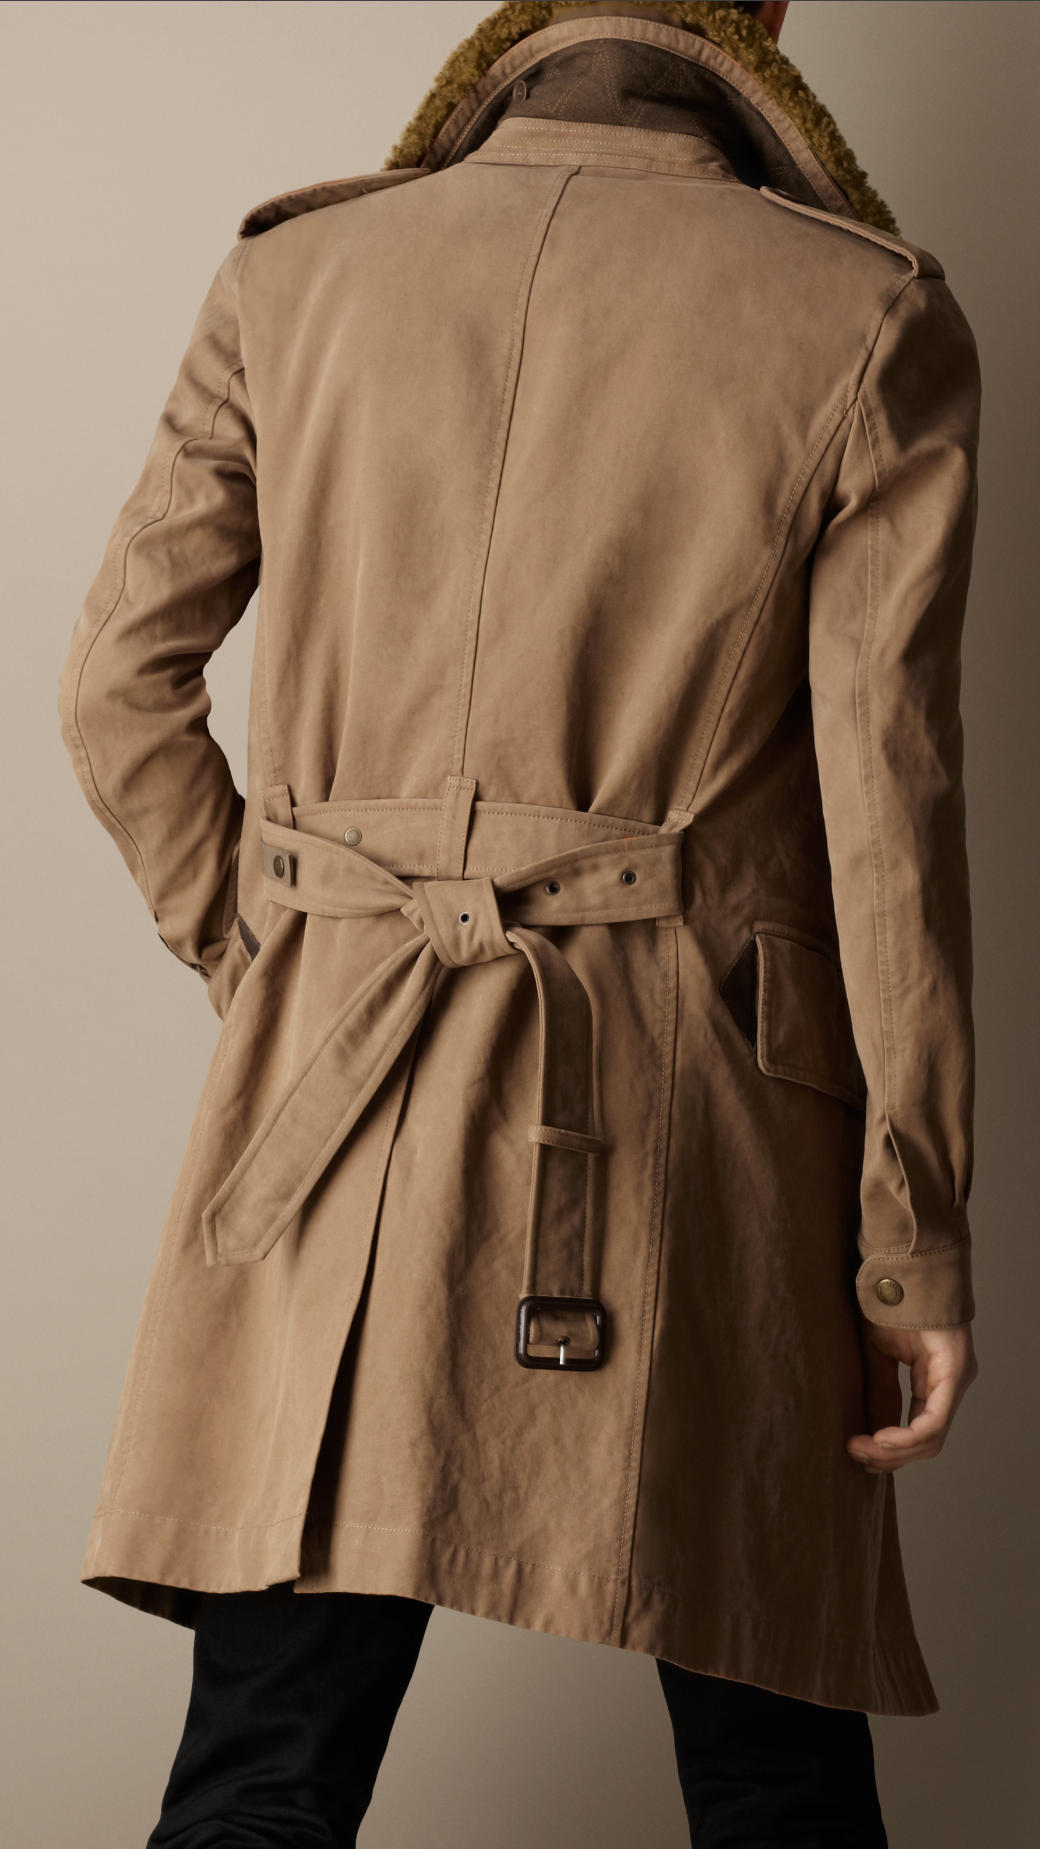 Burberry Shearling Collar Heritage Trench Coat in Military Khaki (Brown ...